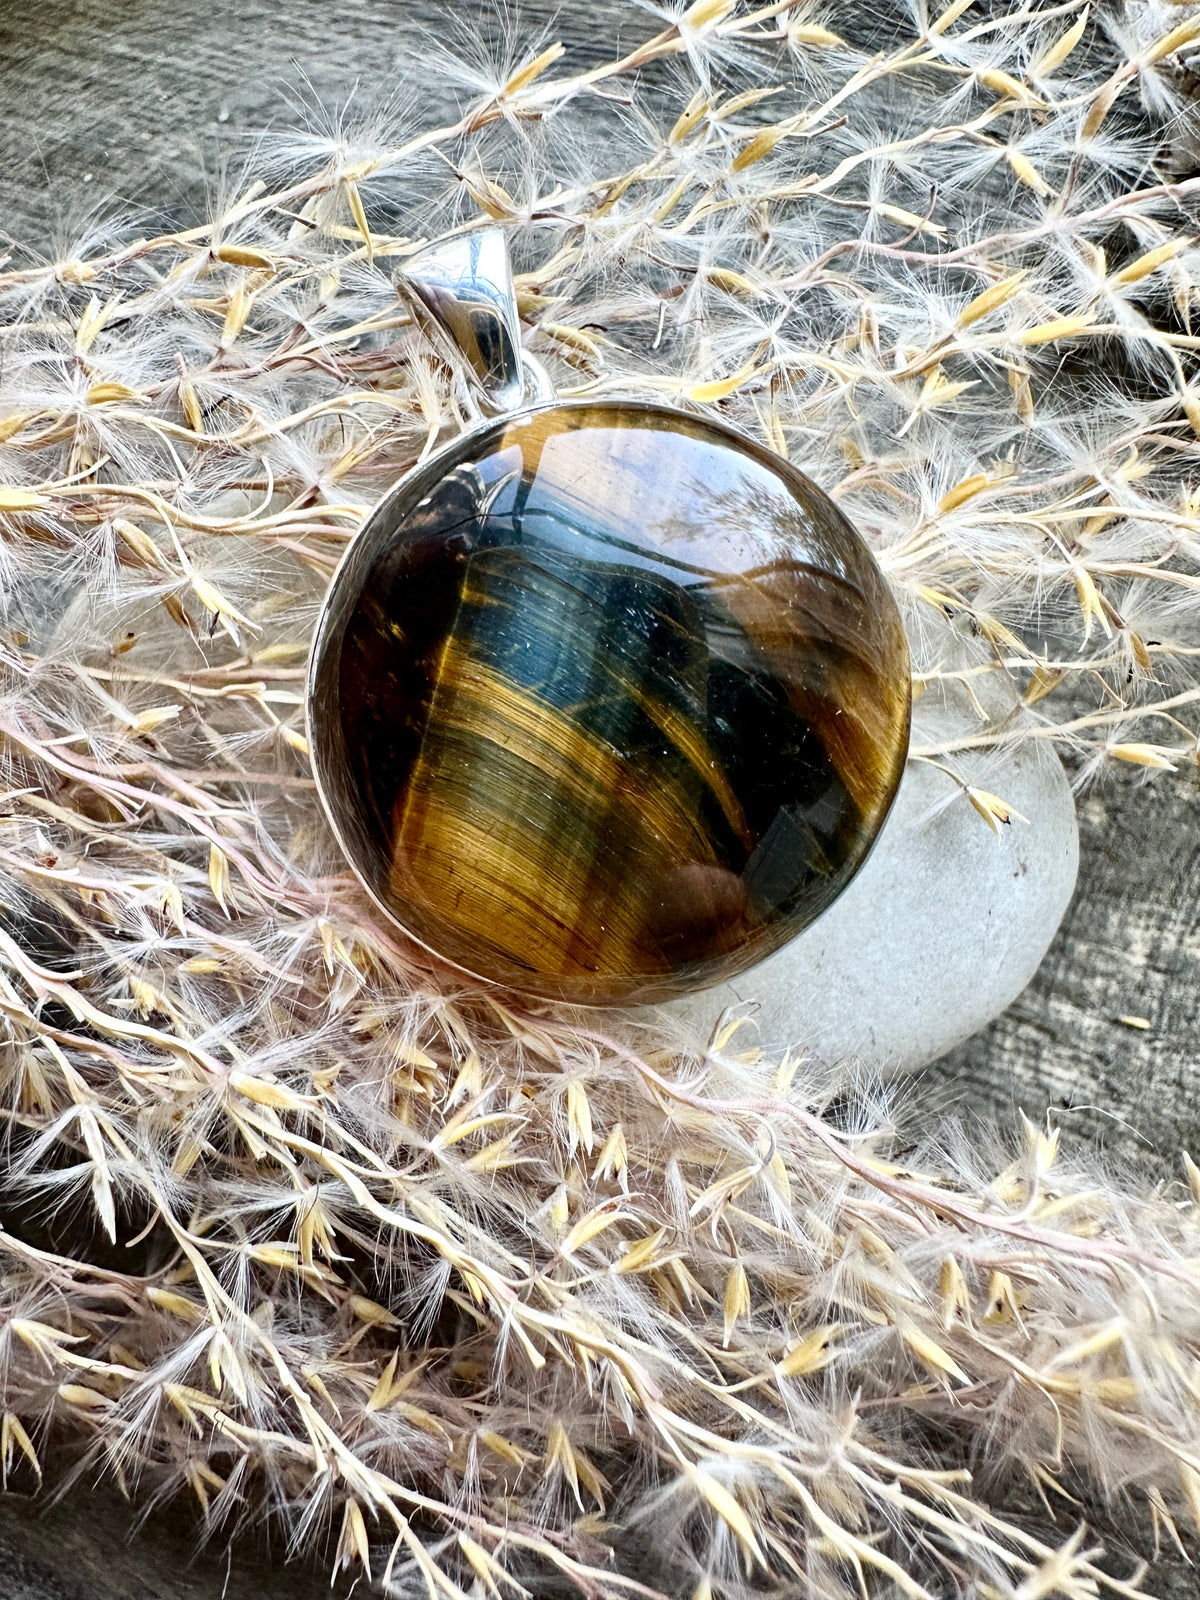 925 Silver Circle Tiger's Eye Pendant: Timeless Charm with Earthy Energies